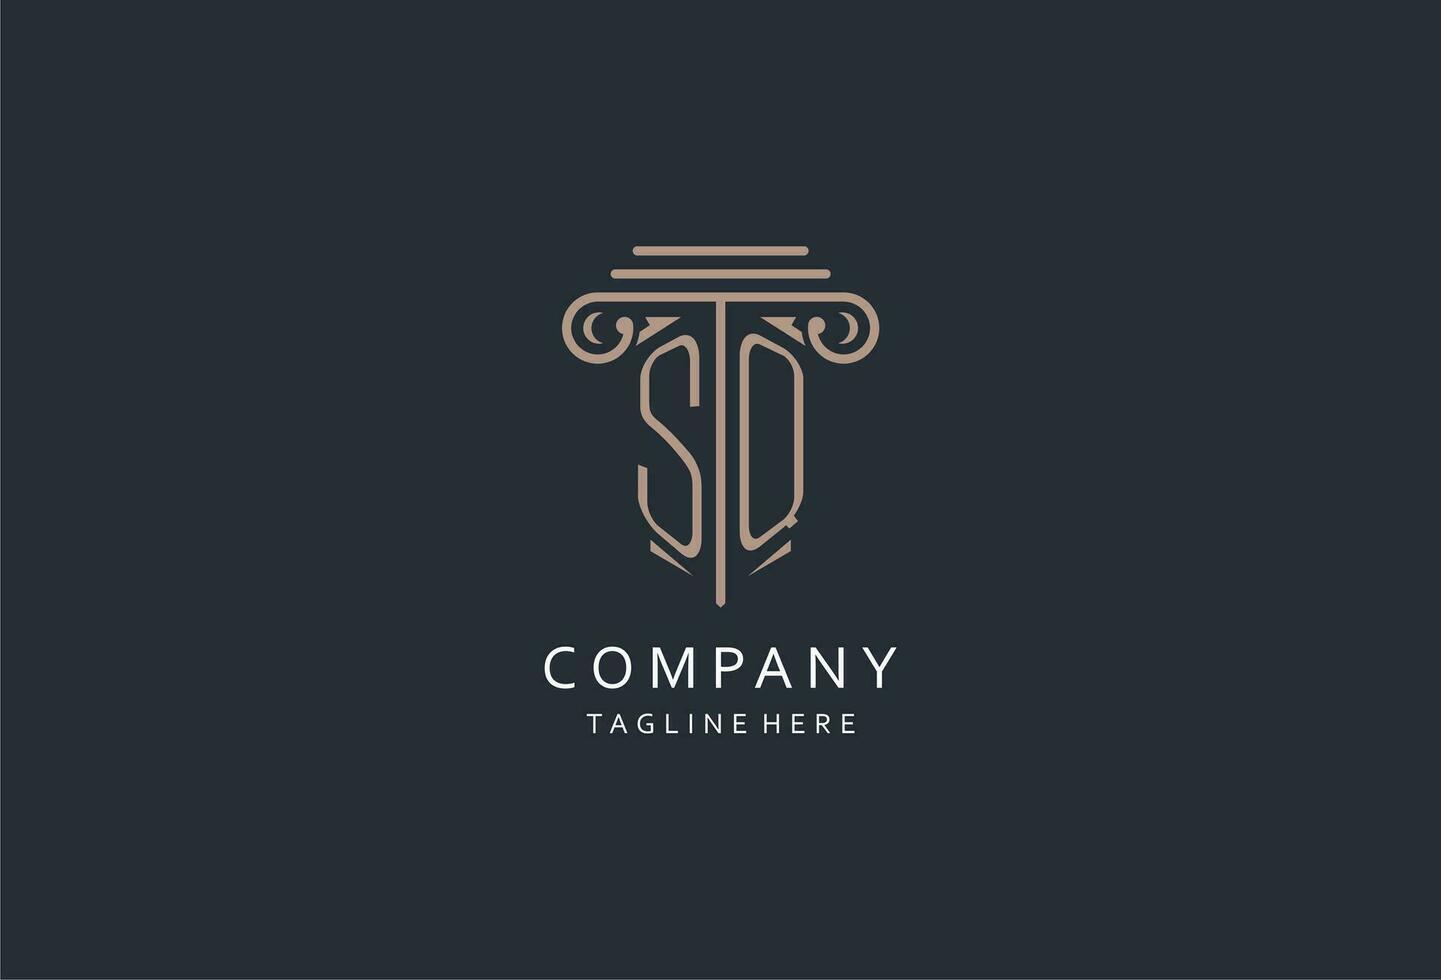 SQ monogram logo with pillar shape icon, luxury and elegant design logo for law firm initial style logo vector